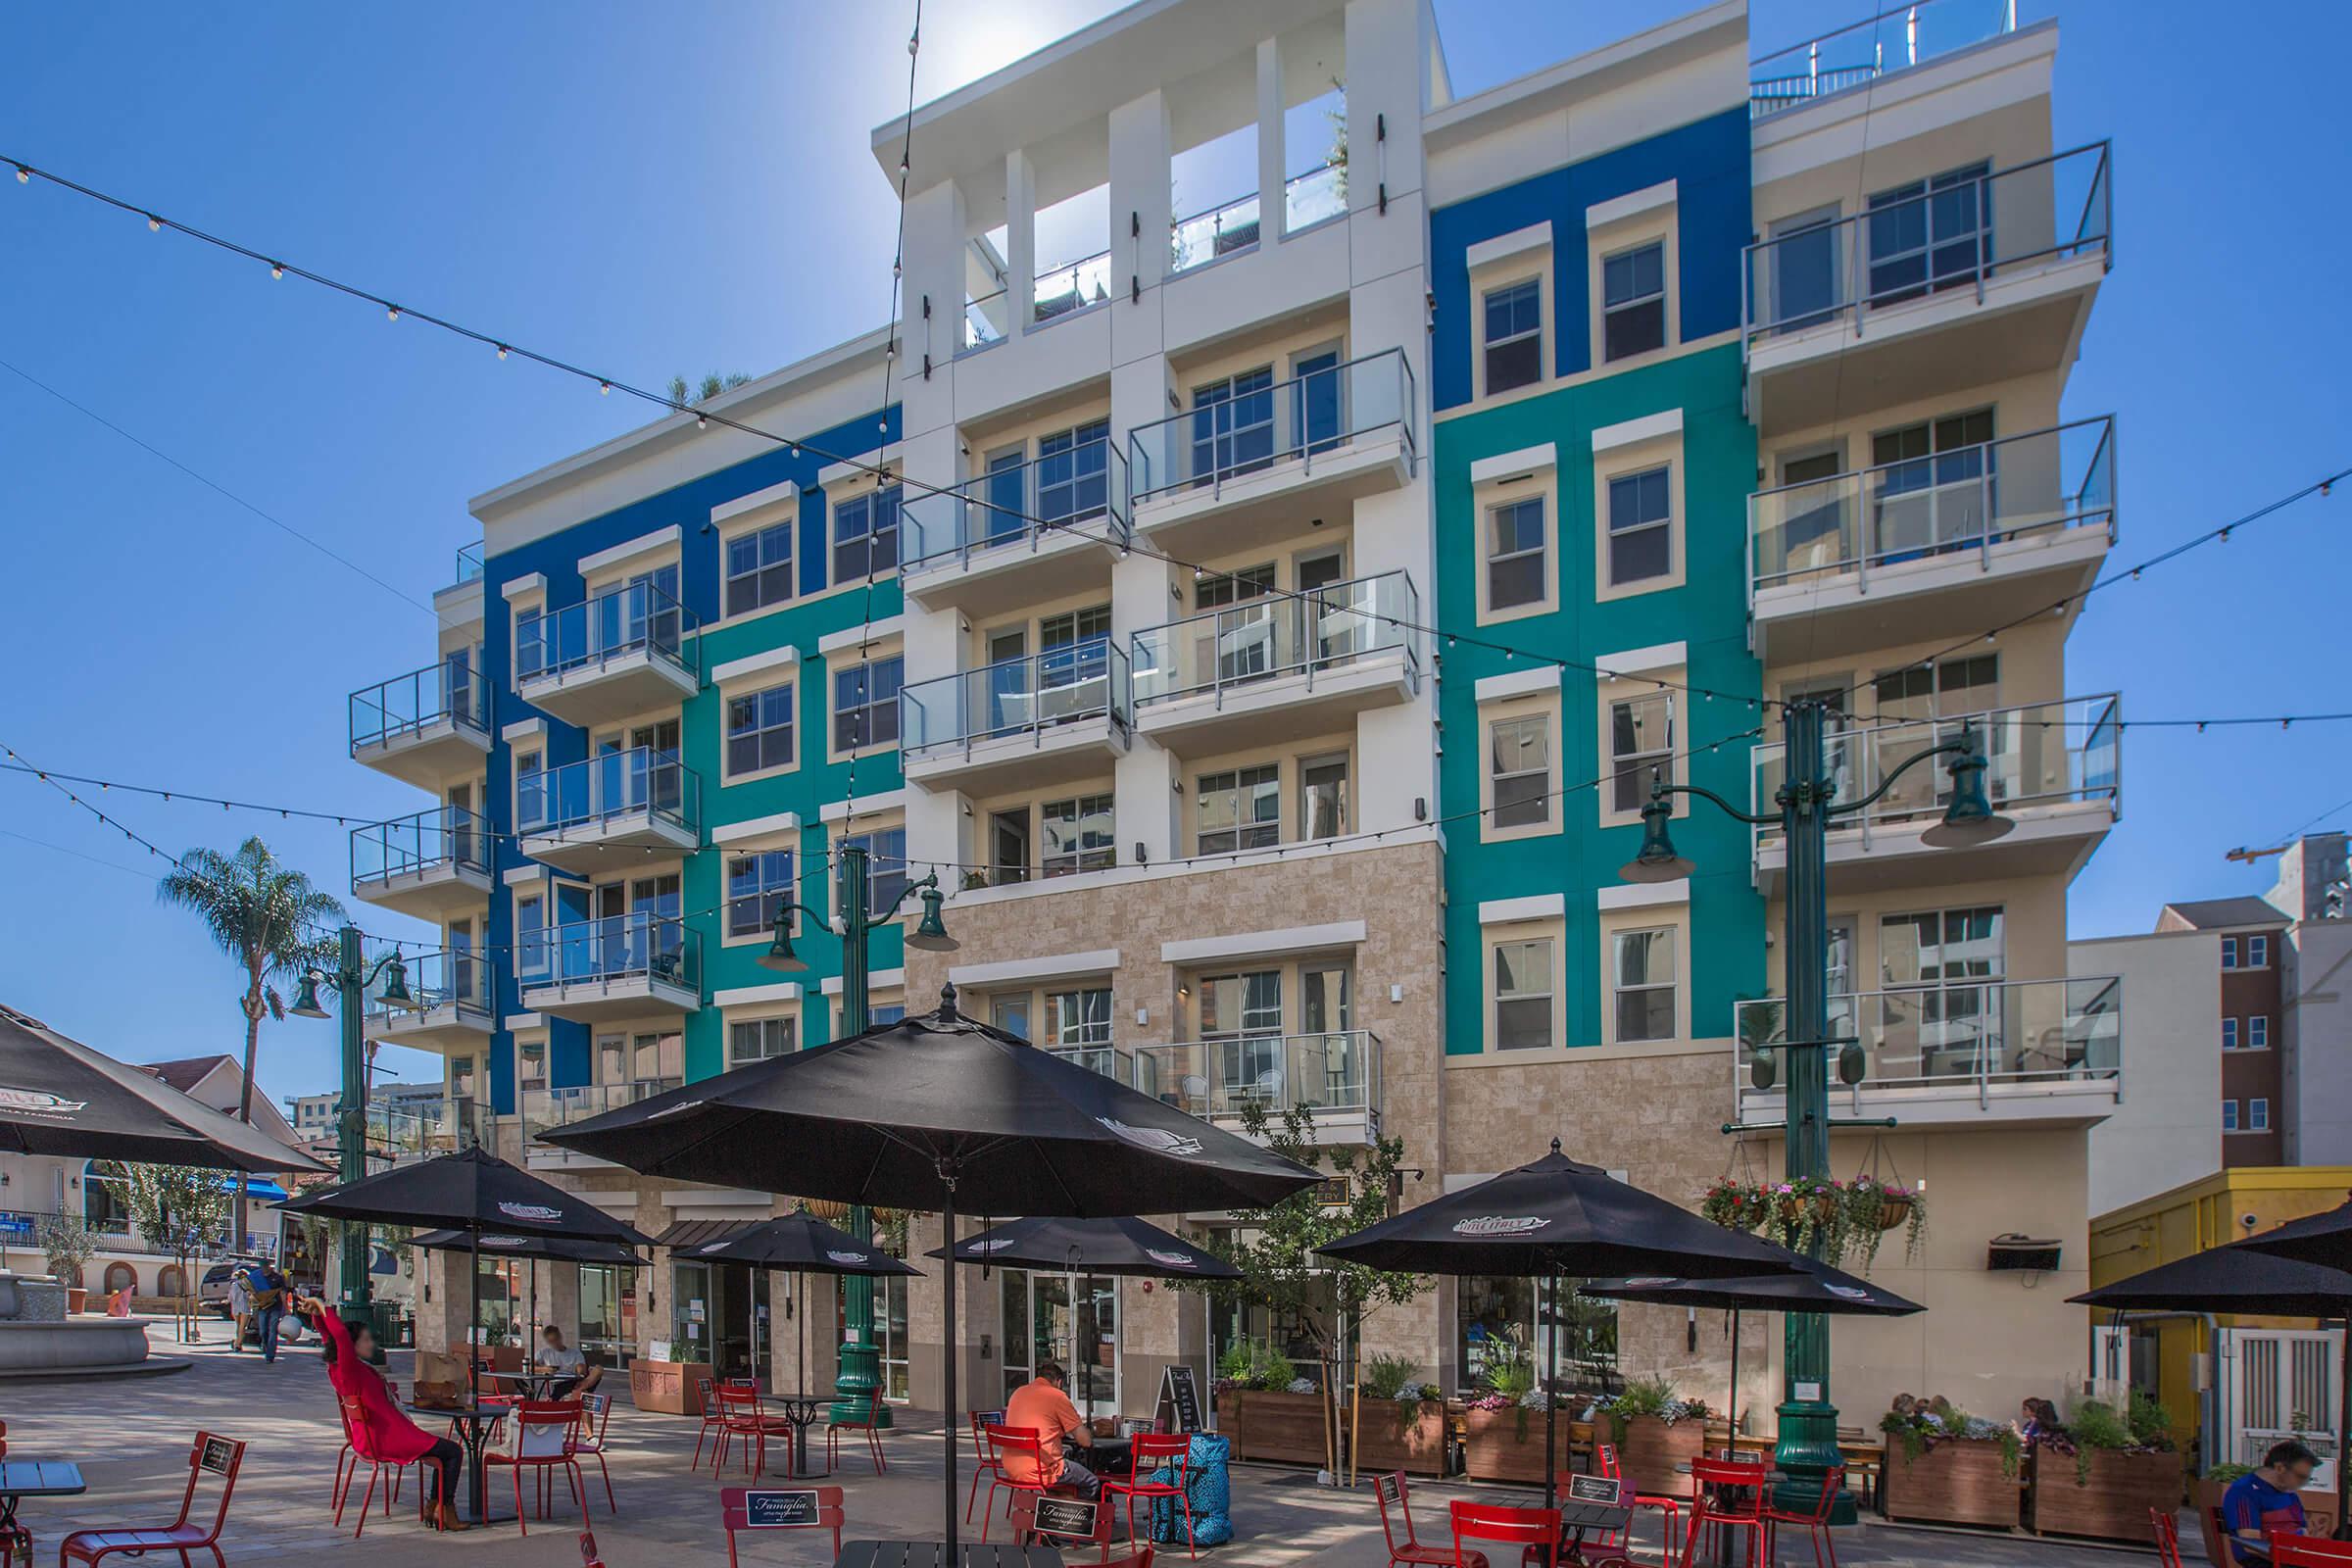 APARTMENTS IN LITTLE ITALY, SAN DIEGO, CA